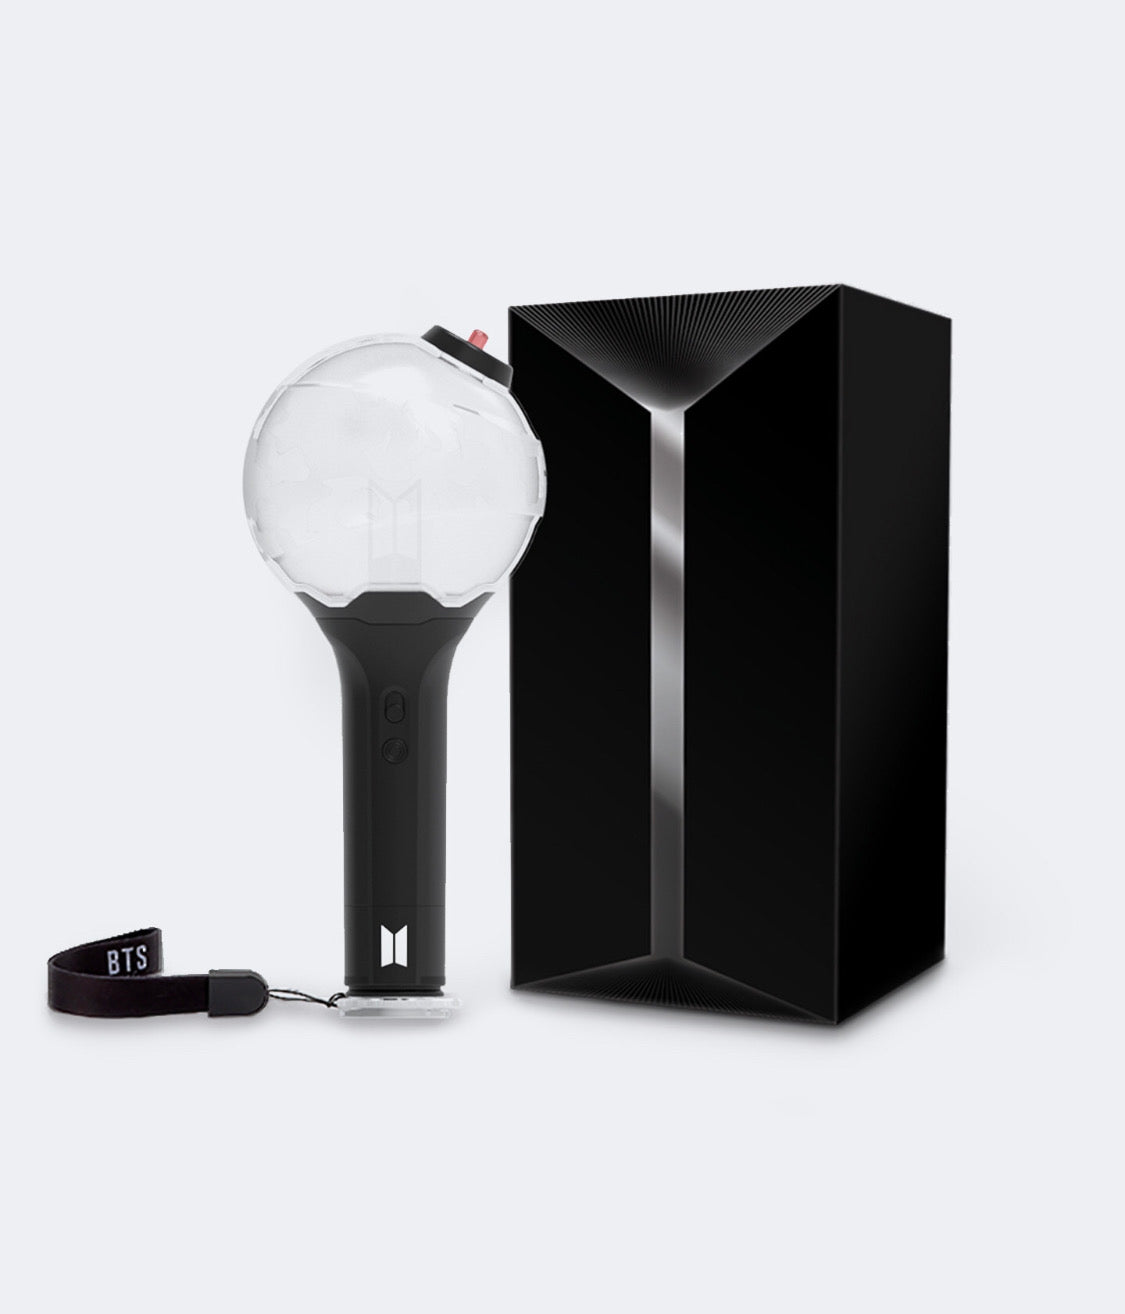 Light Stick Special Edition Se Map Of The Soul Ver/4 Army Bomb Ver/3